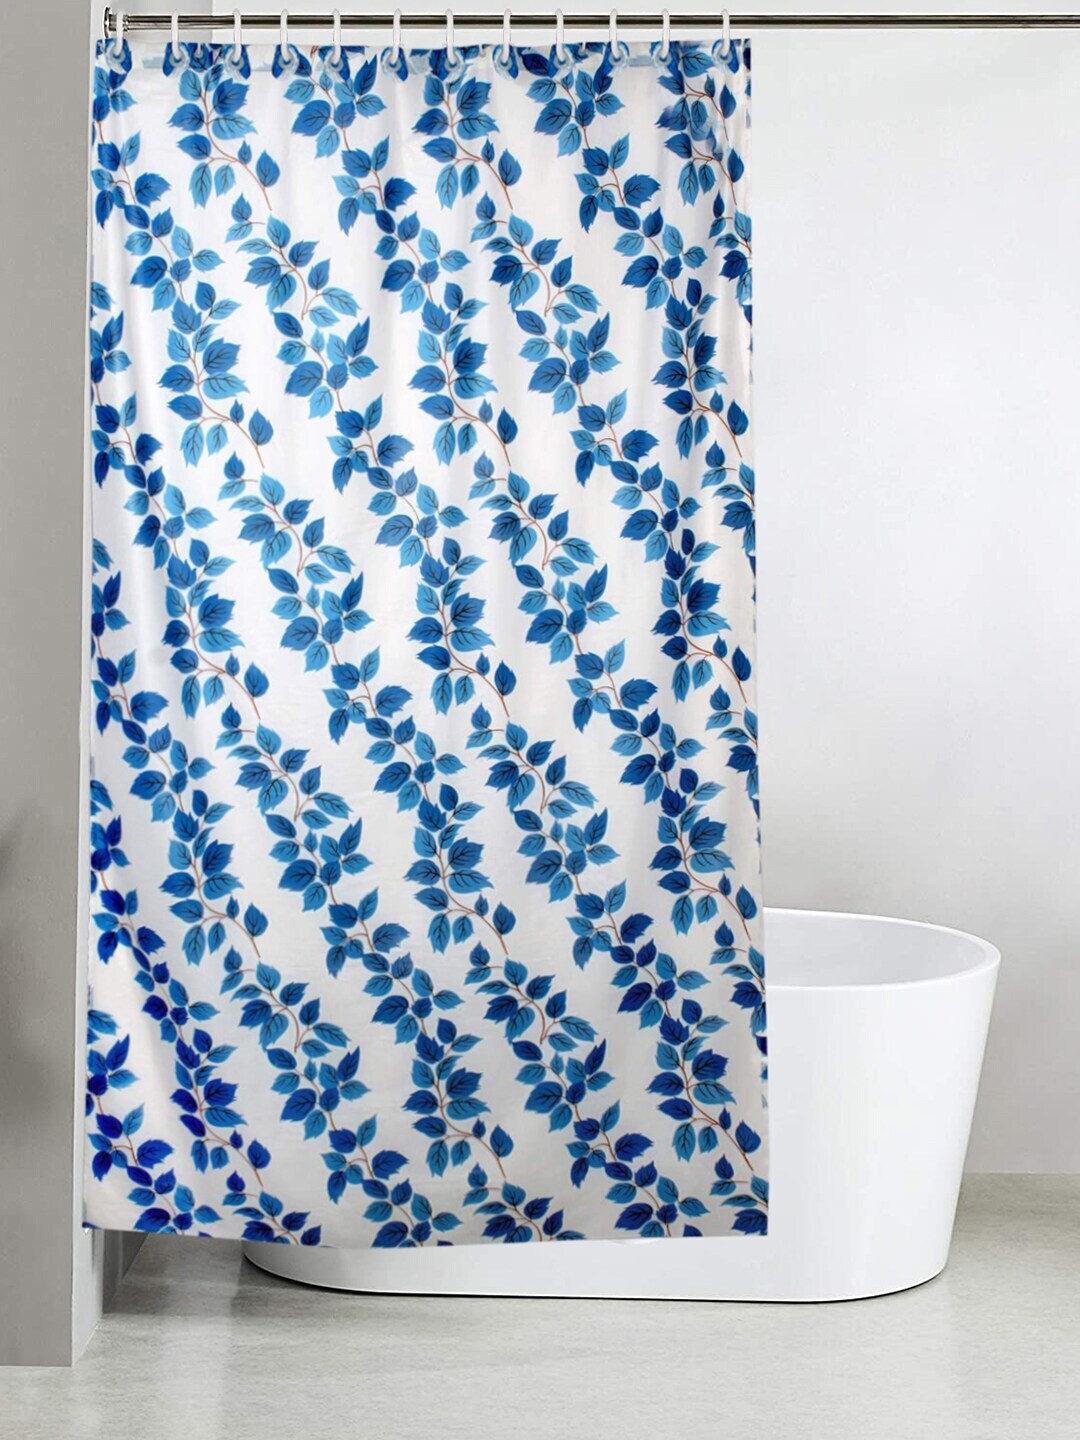 Kuber Industries Blue & White Leaf Printed Waterproof PVC Shower Curtain With Hooks Price in India